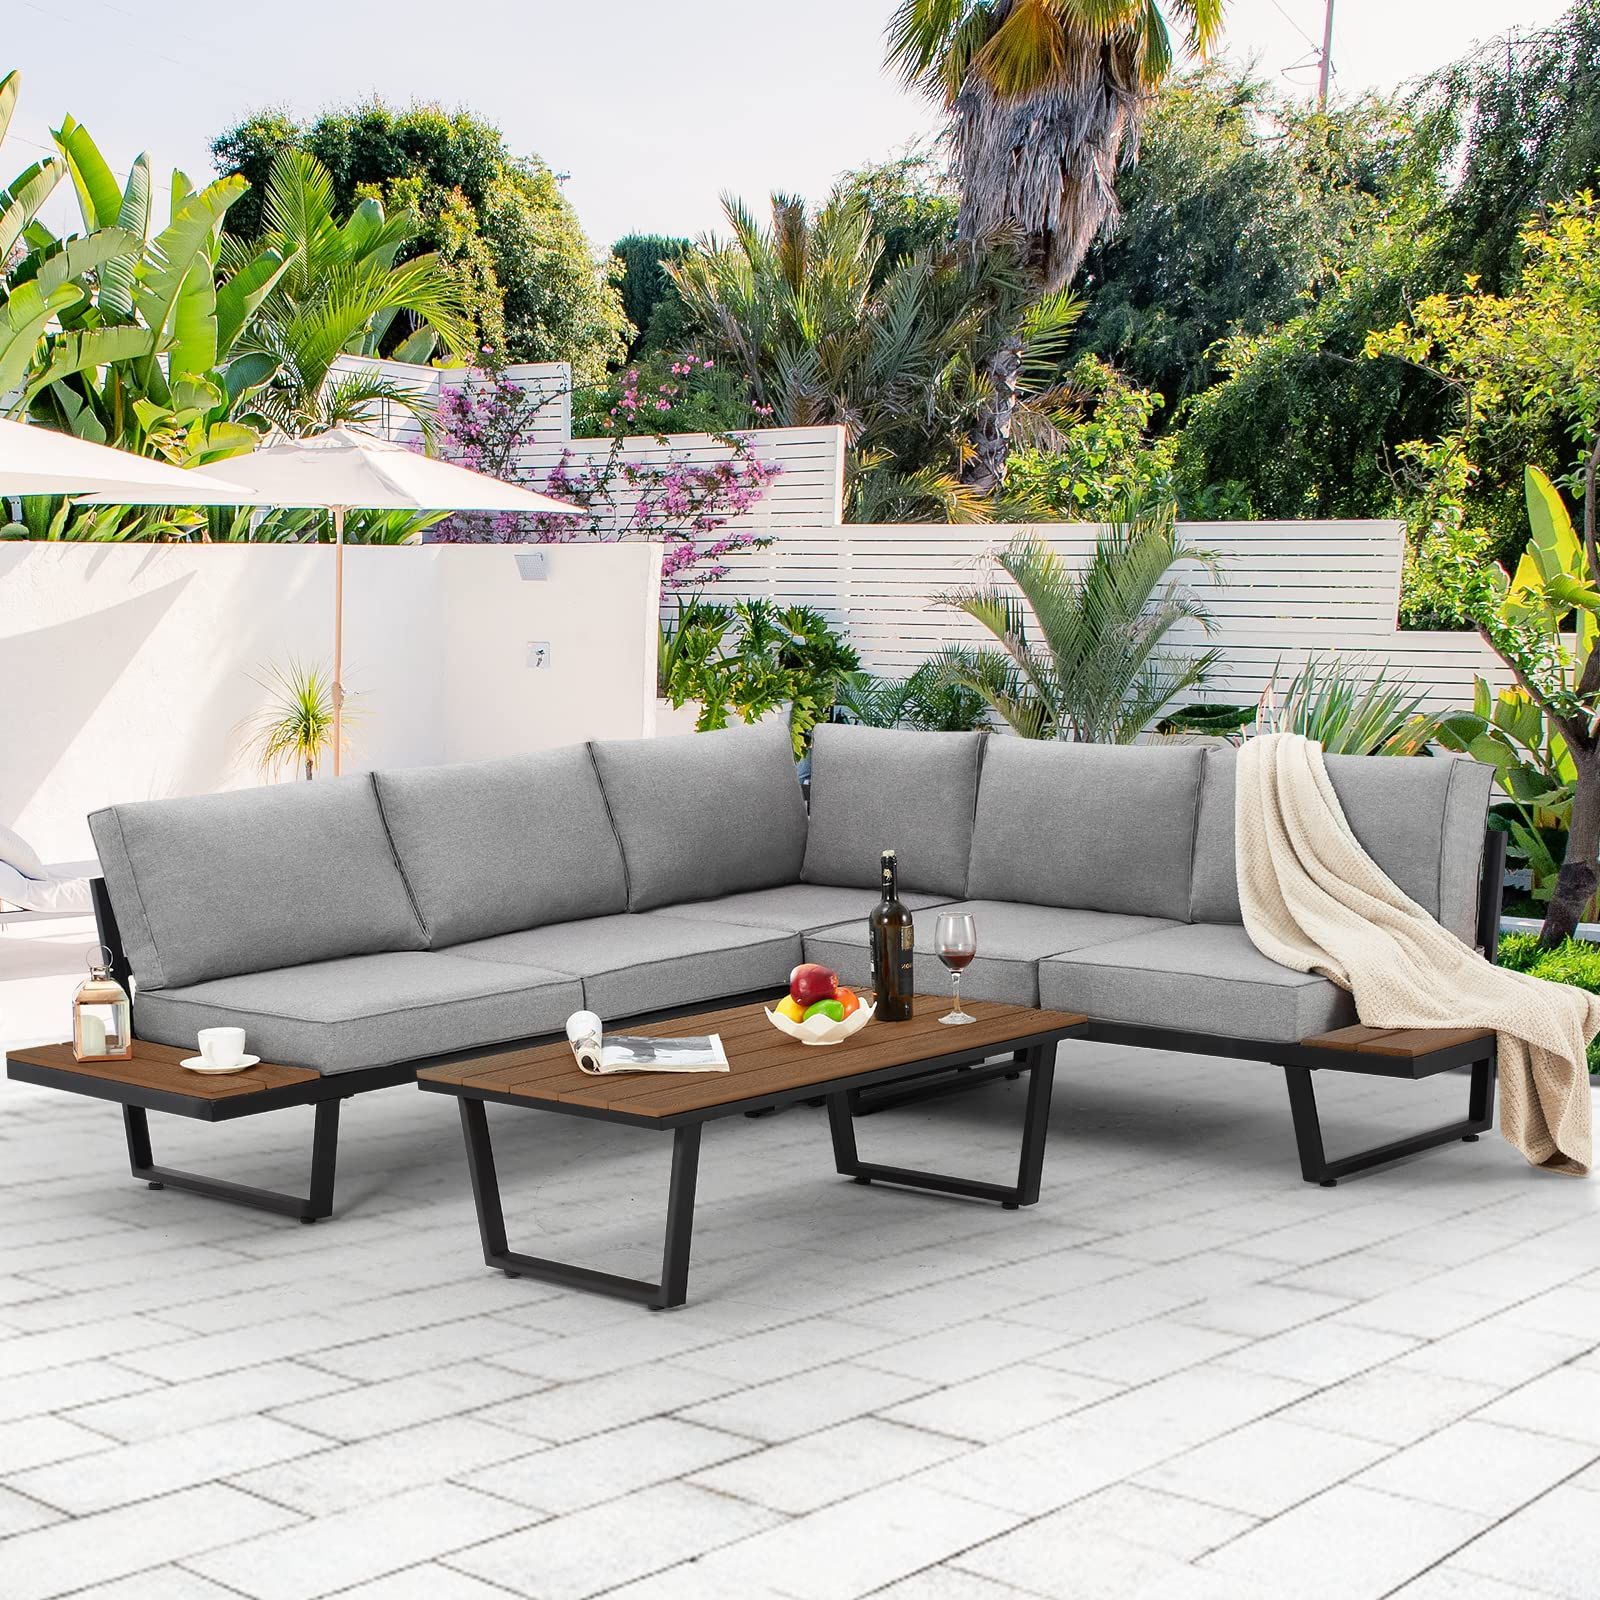 Amazon: Erommy 4 Pieces Outdoor Sectional Sofa Set With Coffee Table,  91''×91'' Extra Large L Shaped Metal Conversation Set With All Weather Gray  Cushion And Built In Side Table For Patio, Backyard, Garden : Patio, Pertaining To Popular Cushions & Coffee Table Furniture Couch Set (View 4 of 15)